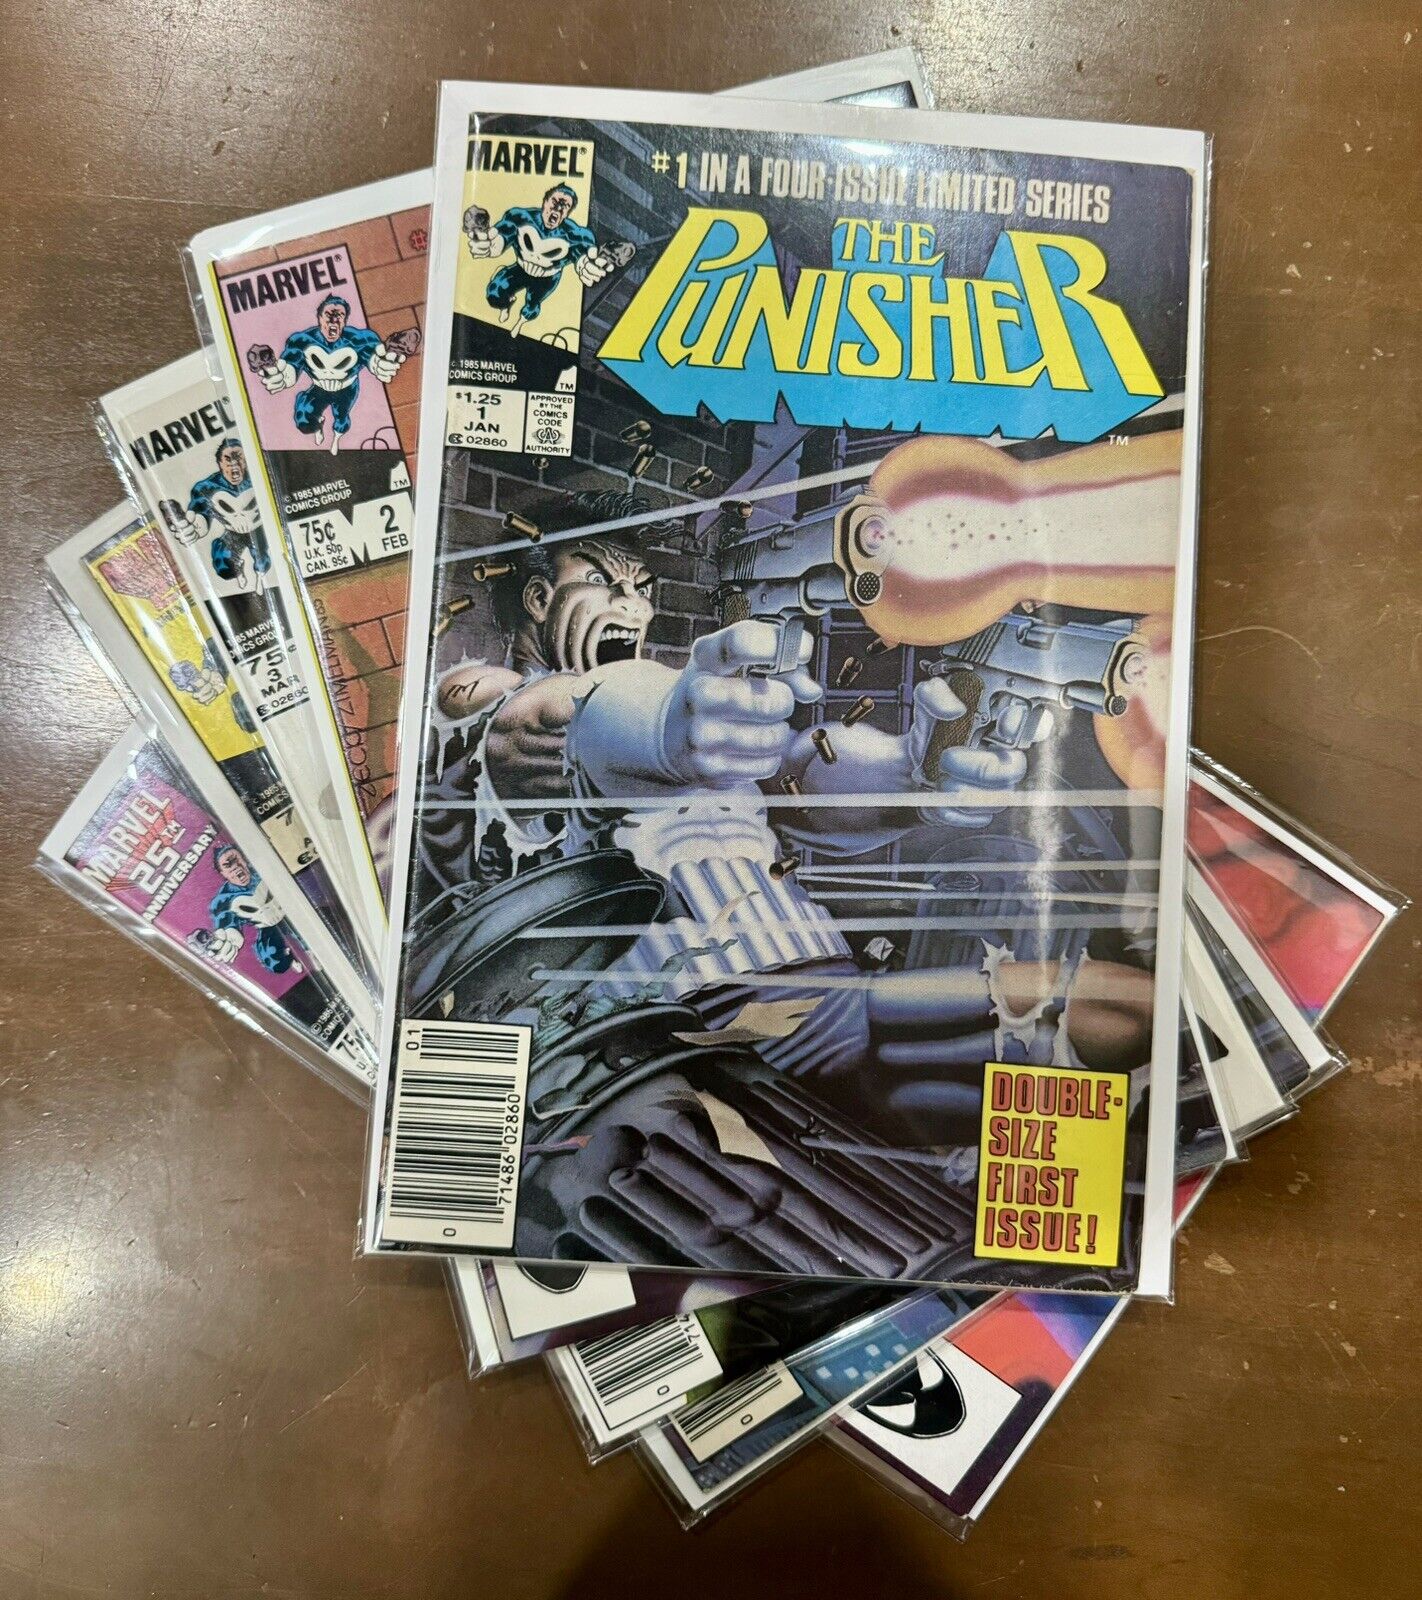 The Punisher #1-#5 Newsstands 1st Solo Limited Series (Marvel Comics 1986) VF-